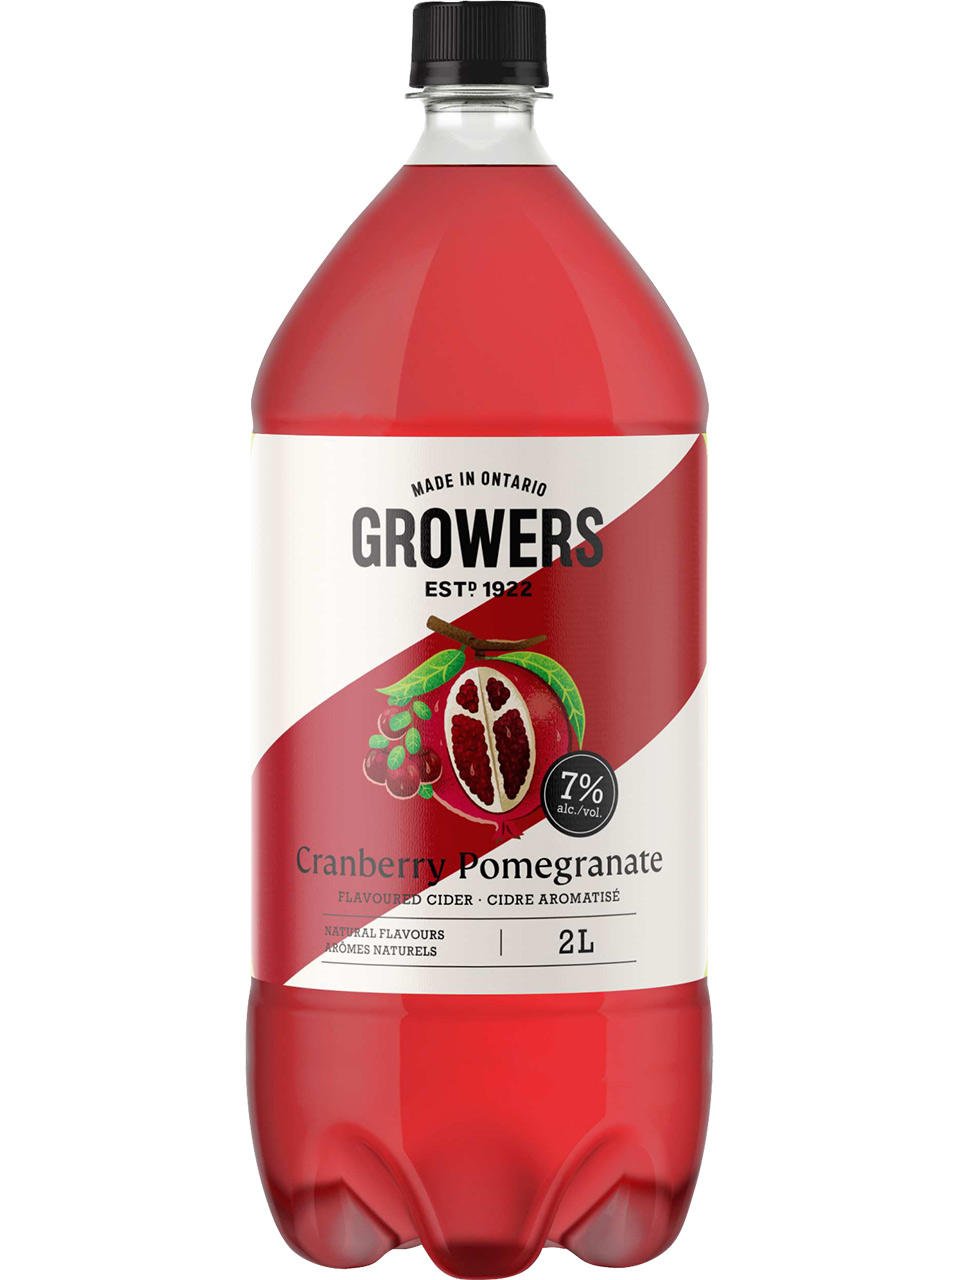 Growers Cranberry Pomegranate Flavoured Cider